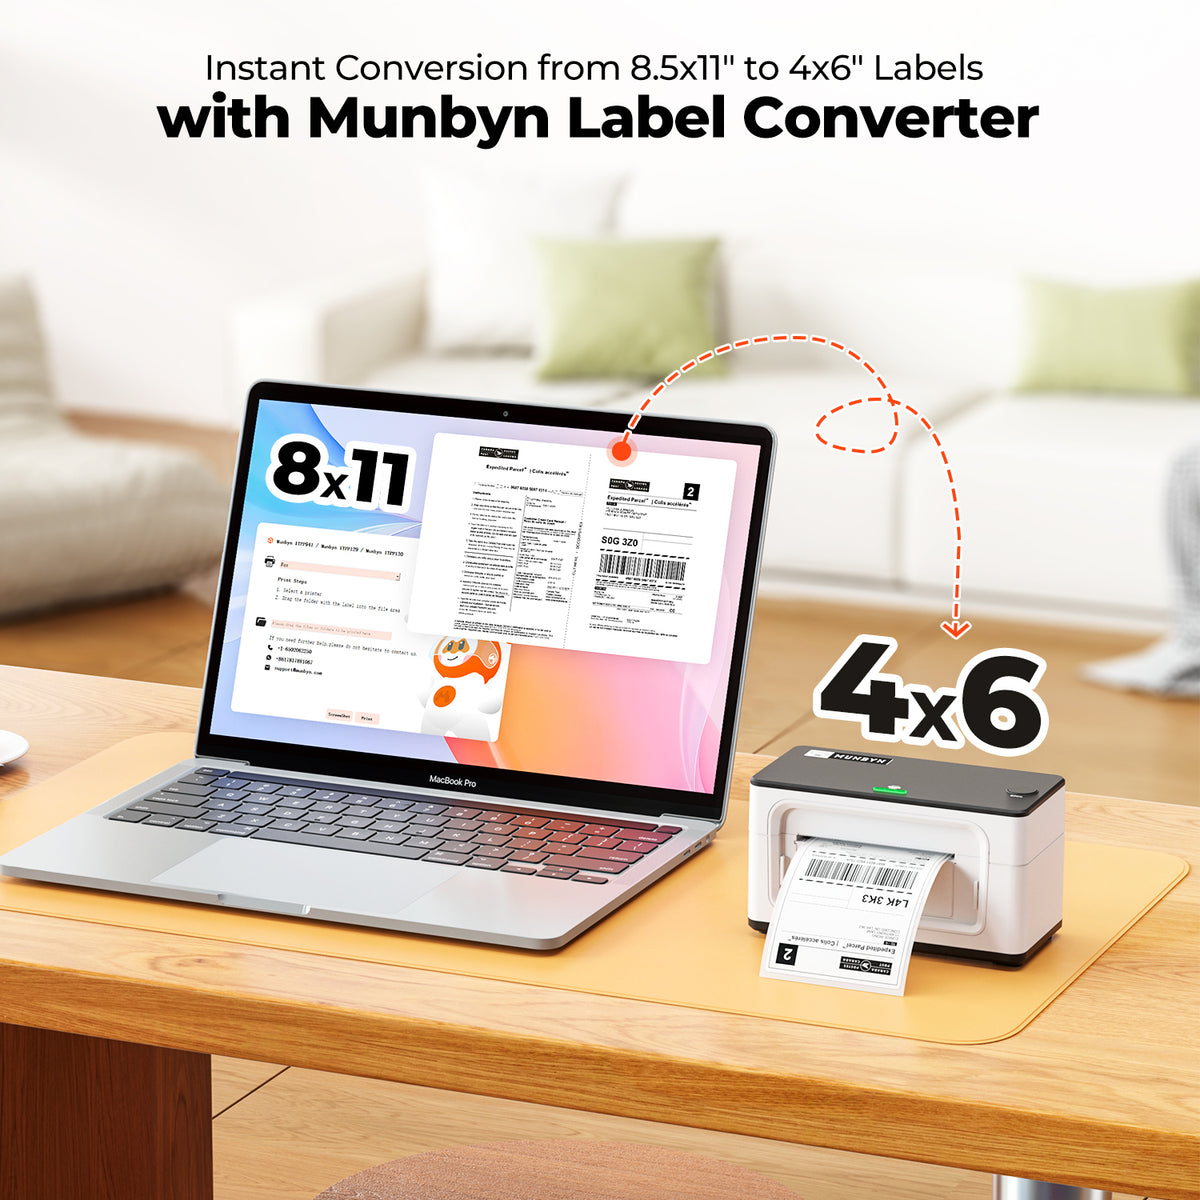 MUNBYN Shipping Label Converter Software can help you effortlessly convert 8.5x11 label sizes to the more manageable and widely-used 4x6 label size.